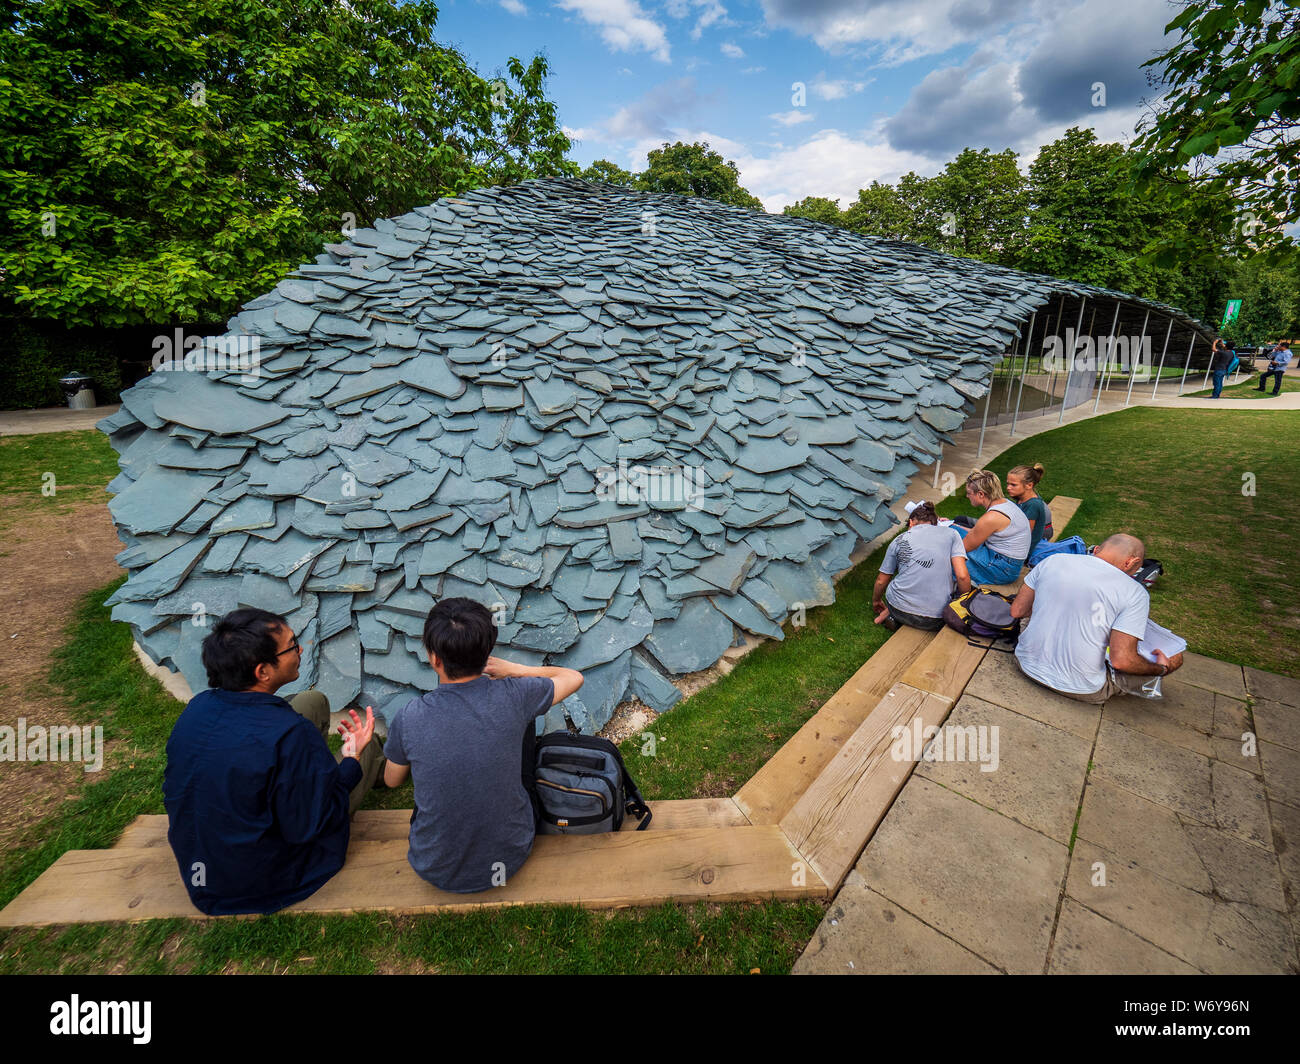 Serpentine Pavilion 2019 in London's Hyde Park. Designed by Japanese architect Junya Ishigami, open between June and Oct 2019. Stock Photo